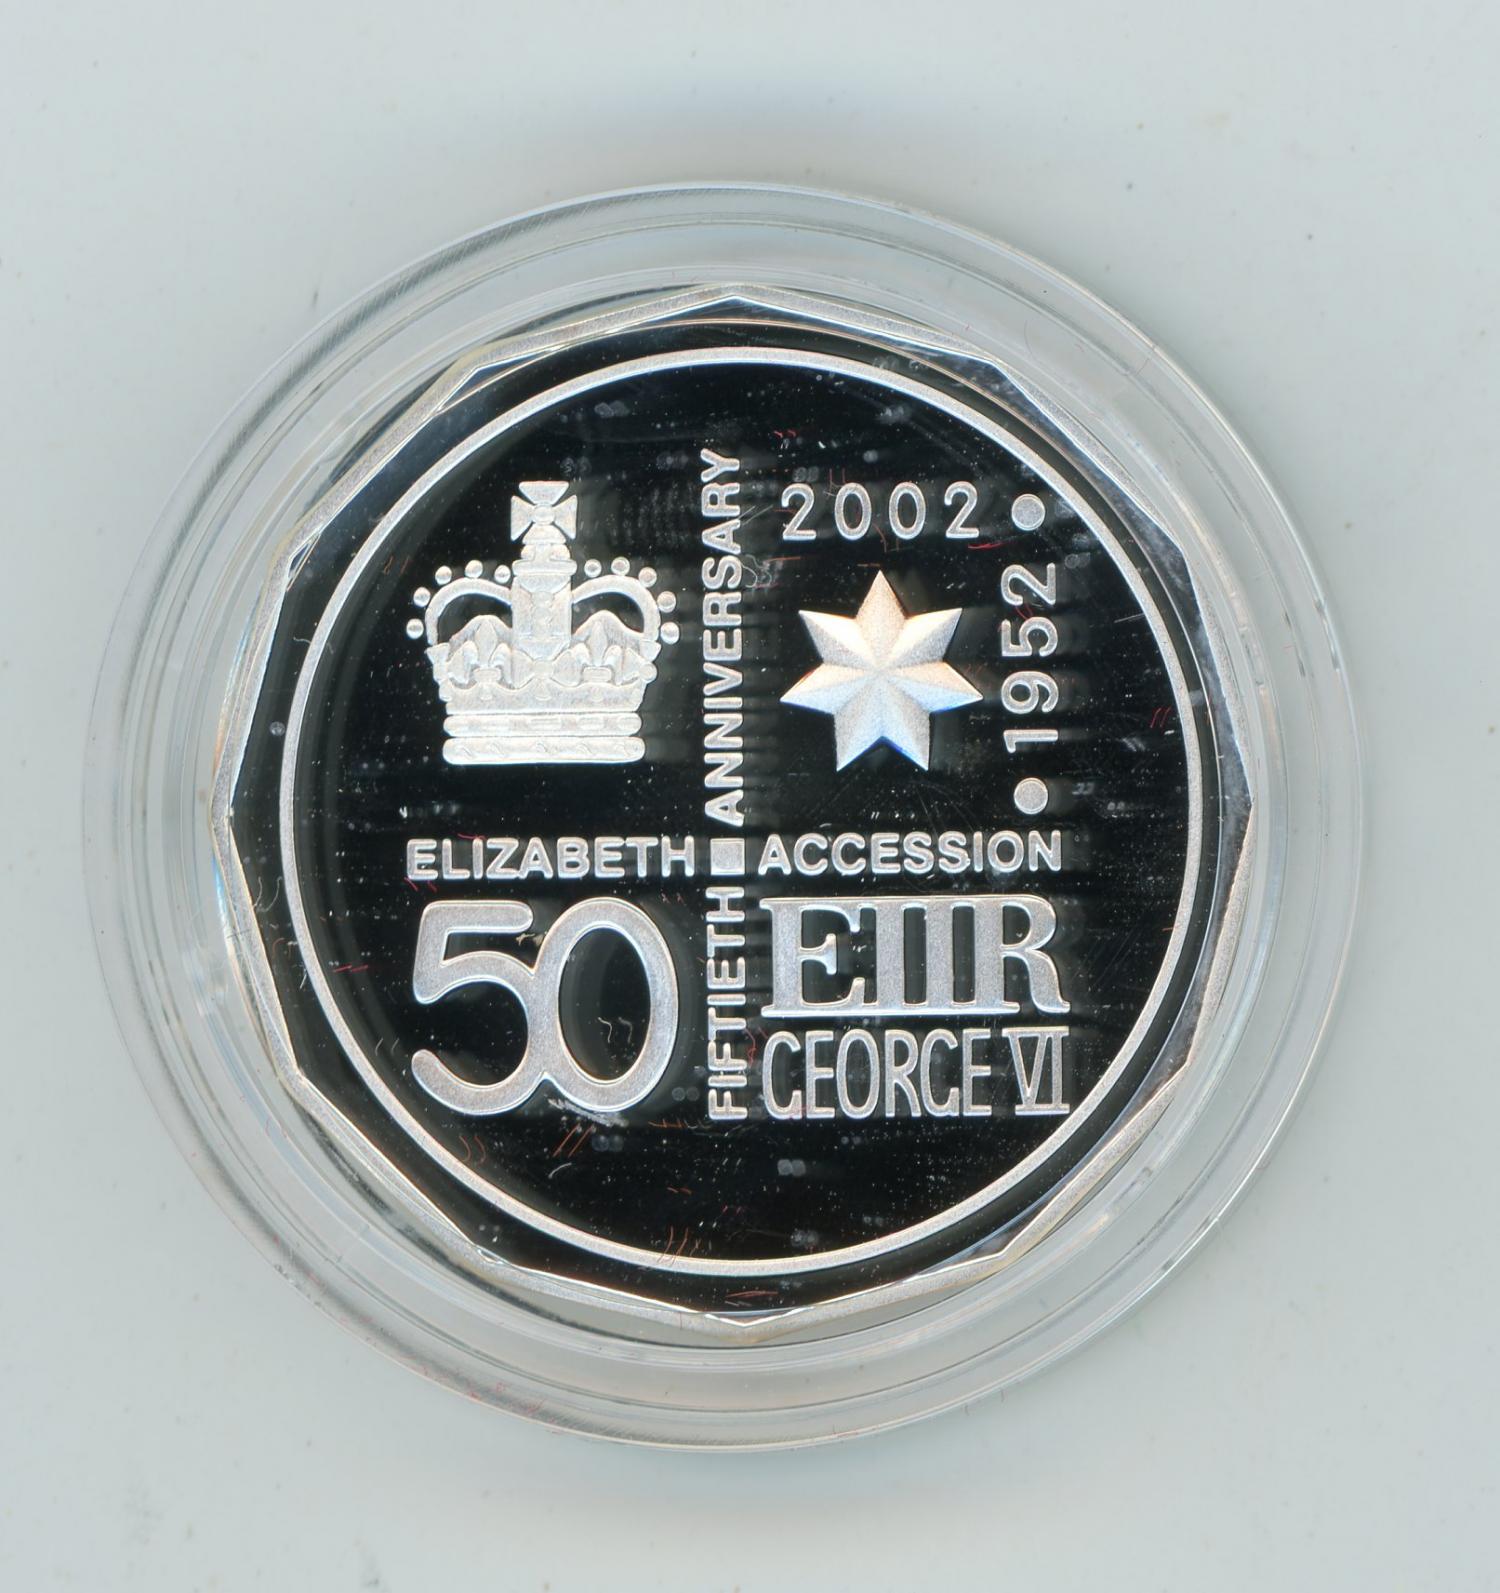 Thumbnail for 2002 Accession of Queen Elizabeth II - 50th Anniversary Silver Proof Coin in Capsule only